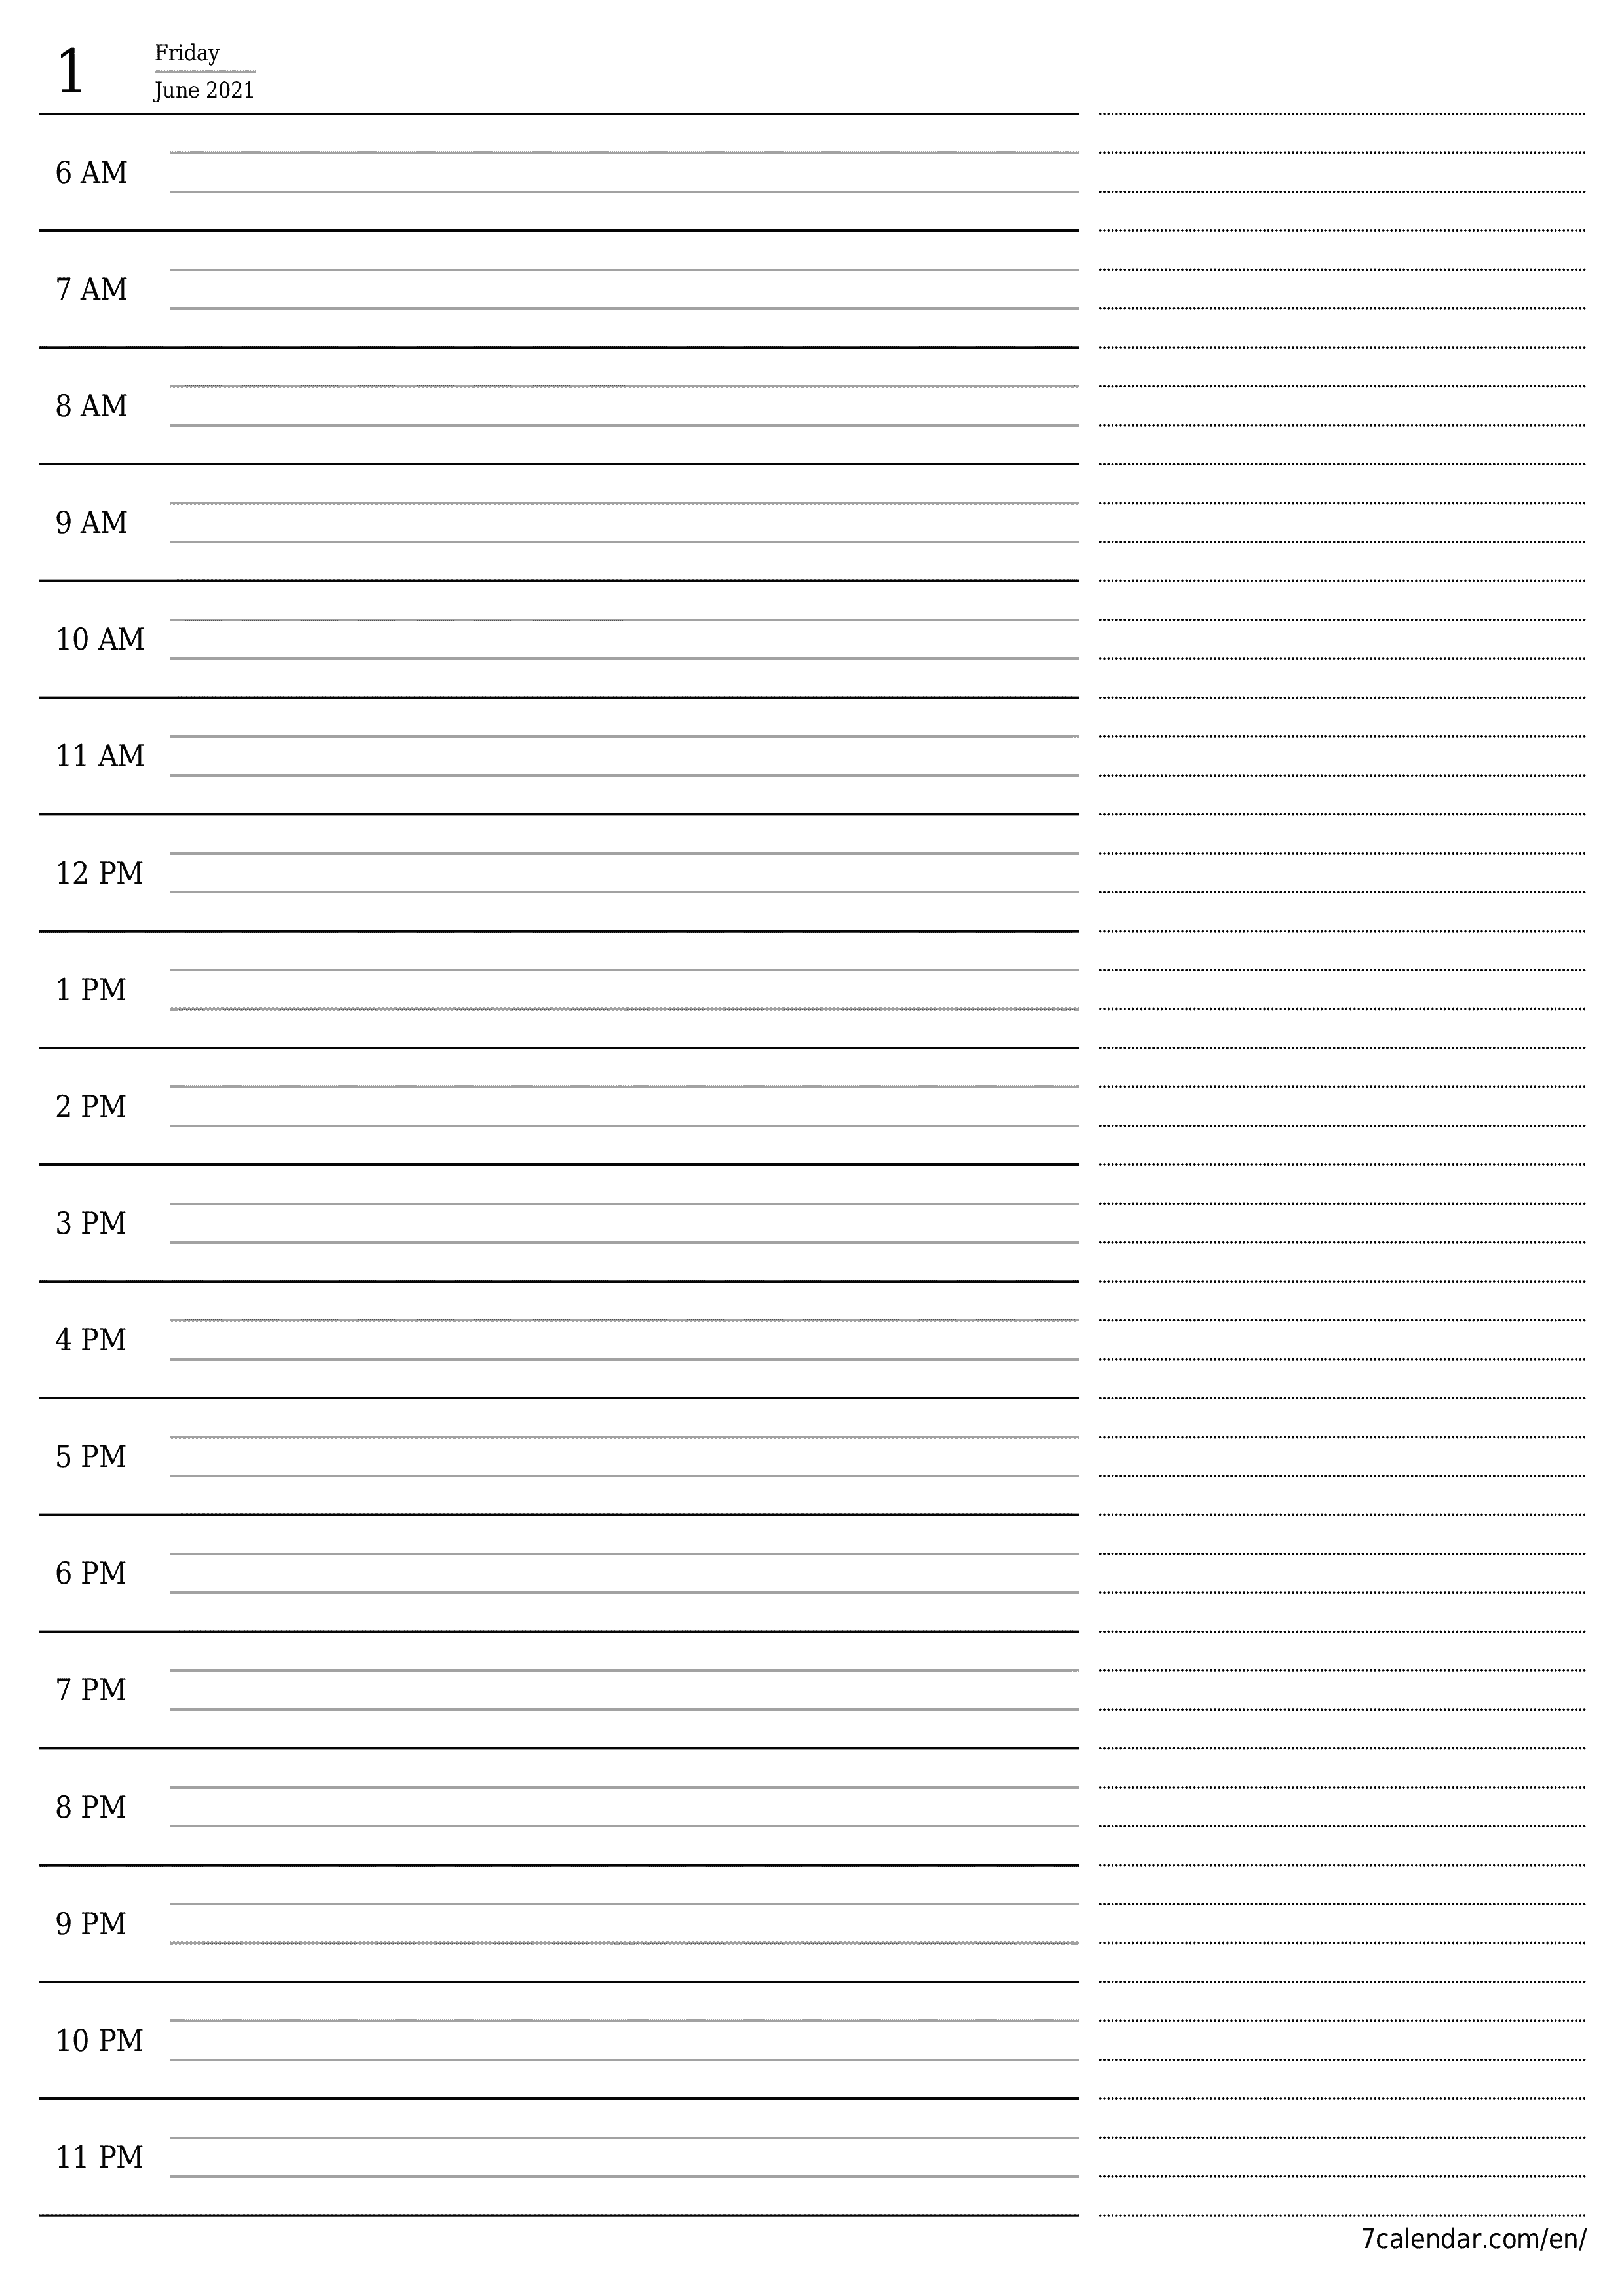 Blank daily printable calendar and planner for day June 2021 with notes, save and print to PDF PNG English